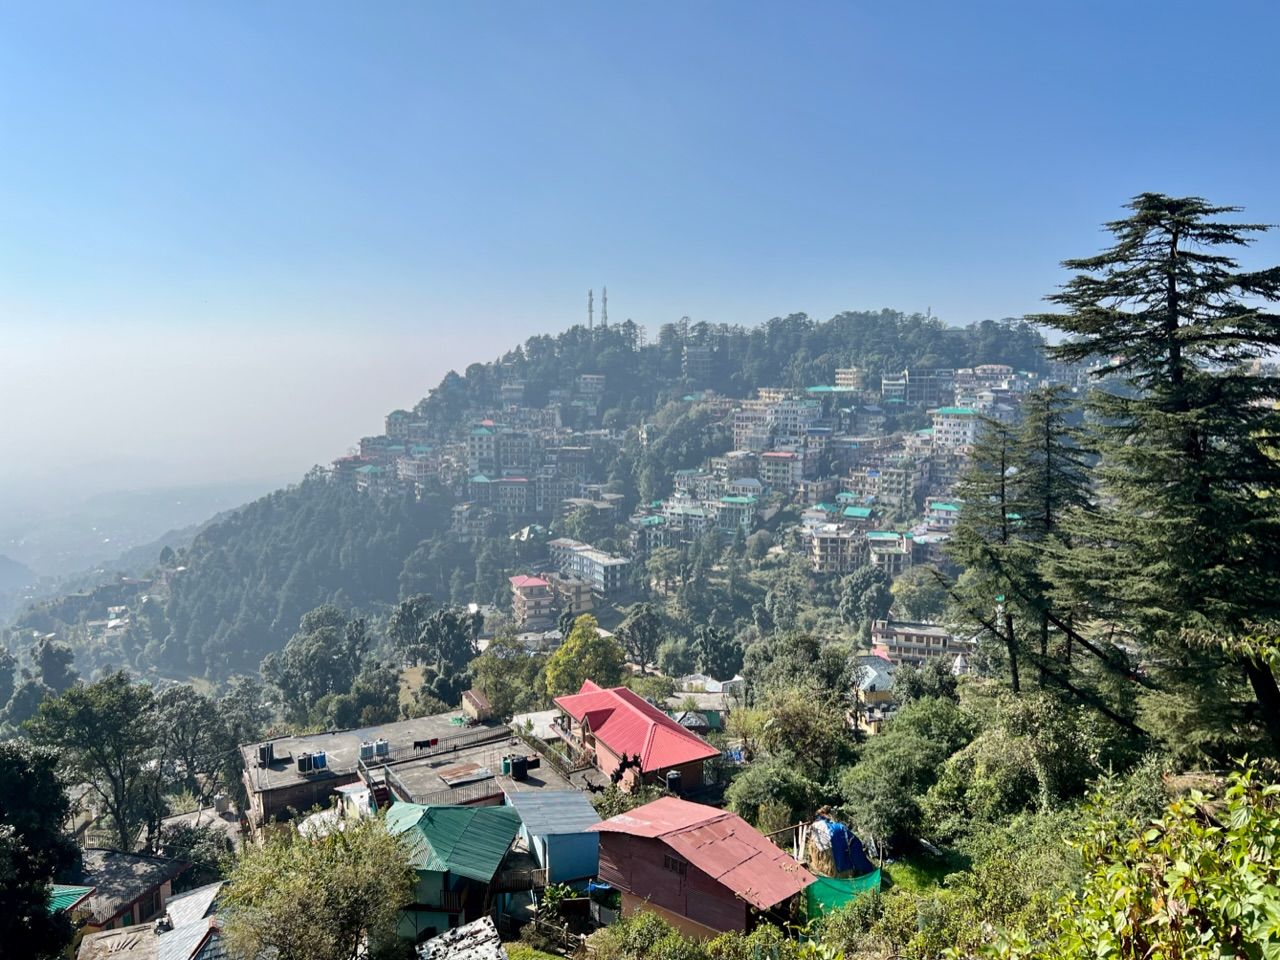 View of Dharamshala, India, taken from the road to Mcleod Ganj